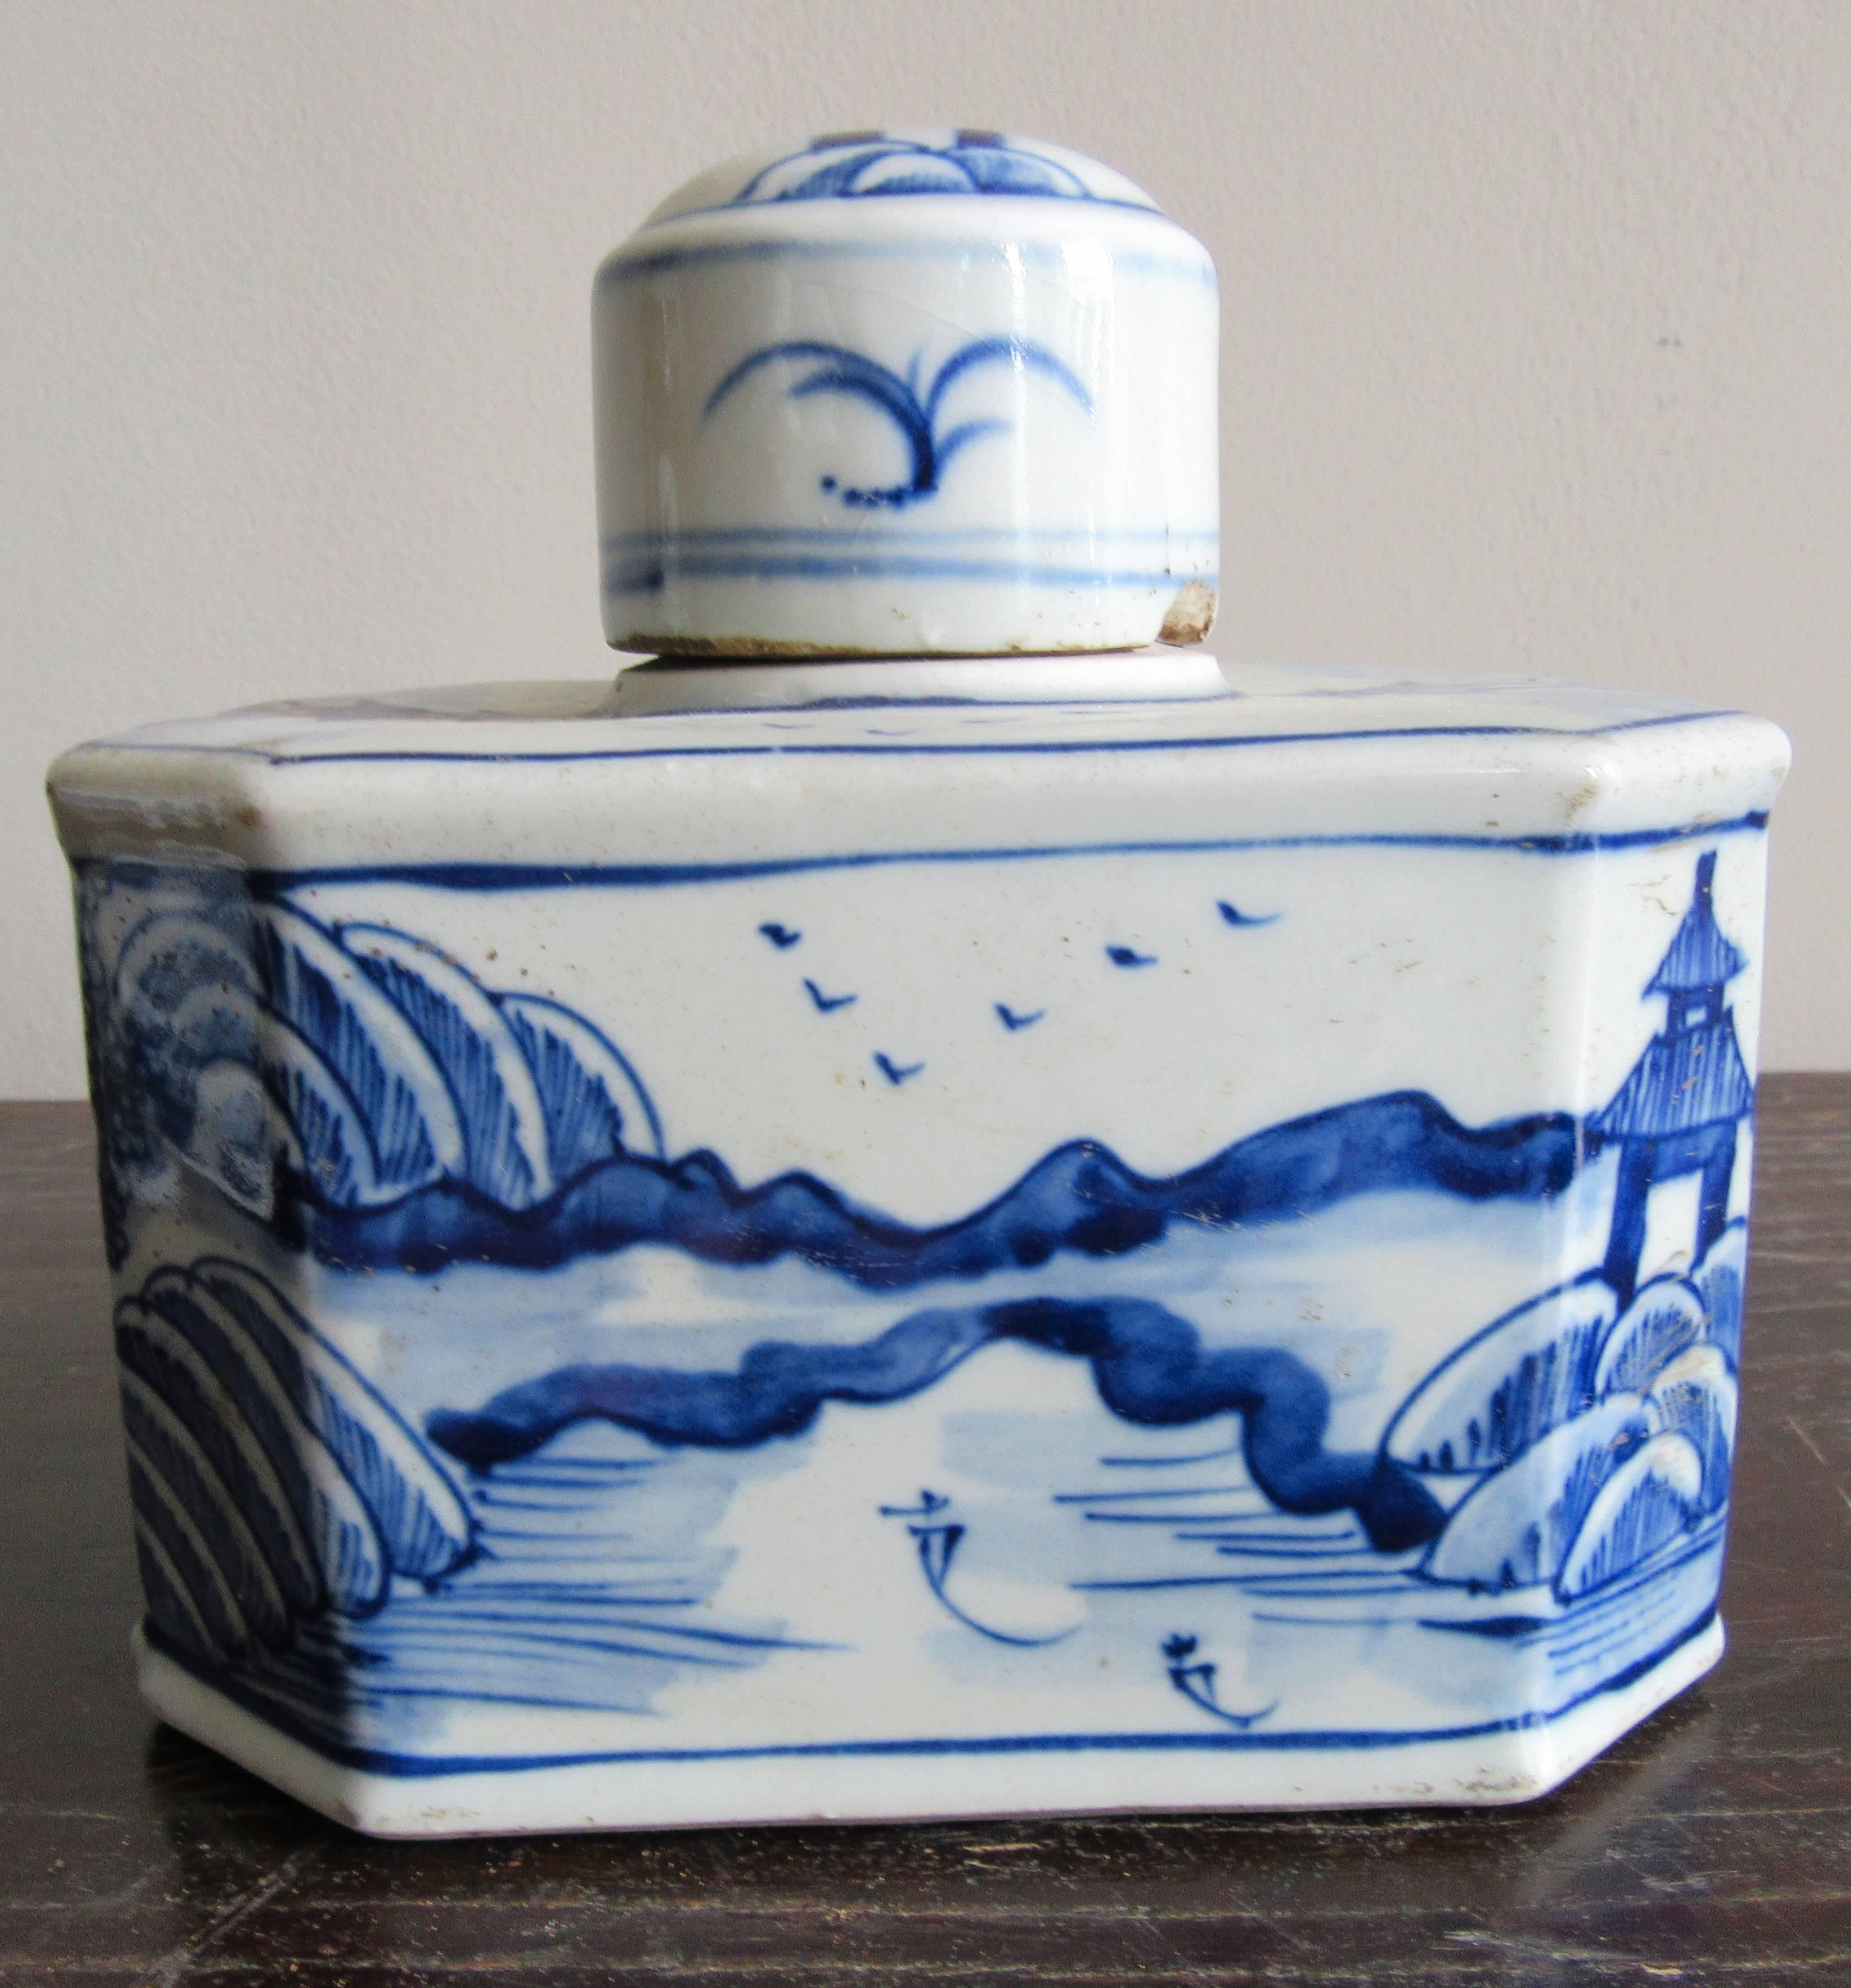 Unusual petite pair of Chinese porcelain tea canisters. Hand-painted with a landscape motif. Sourced from the markets of Jingdezhen, China, home to the Imperial kilns of the Emperors. This region has been renowned for centuries for its excellence in